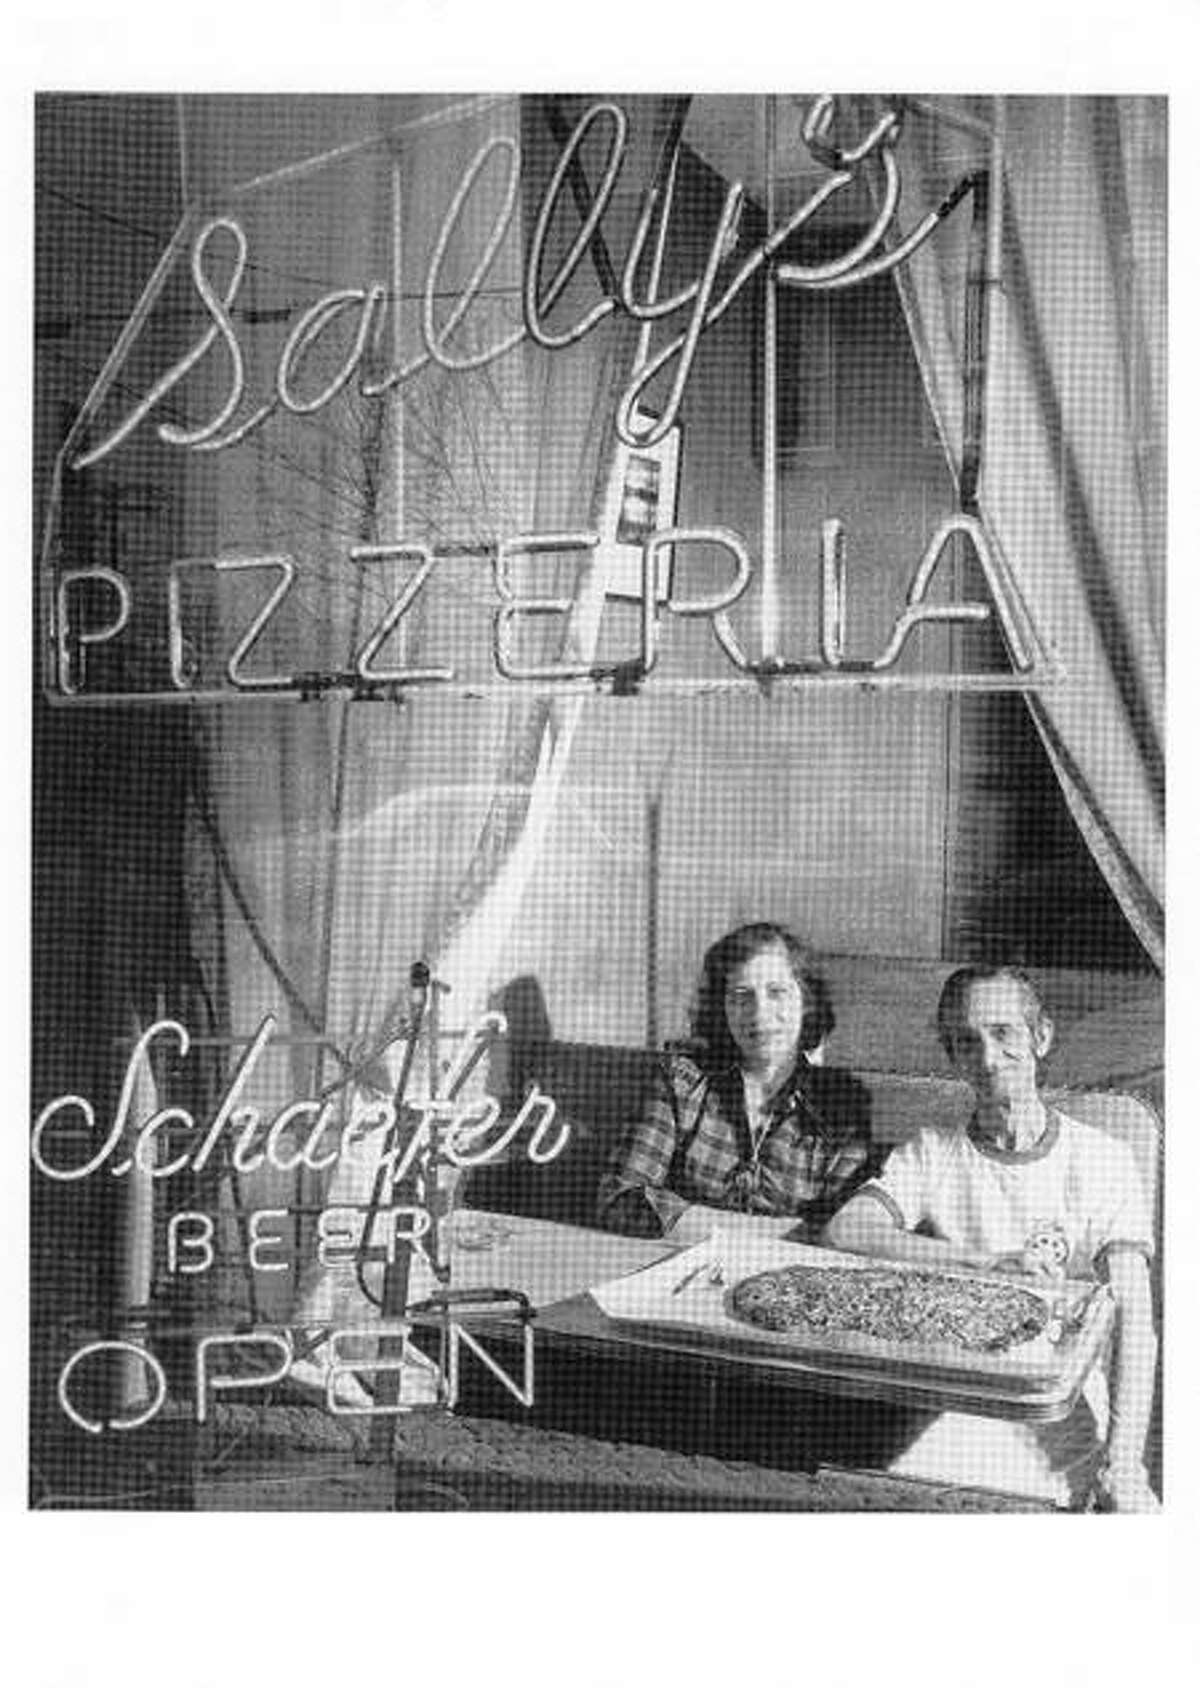 A vintage photo of Flo and the late Sally (Salvatore) Consiglio of Sally's Pizza.